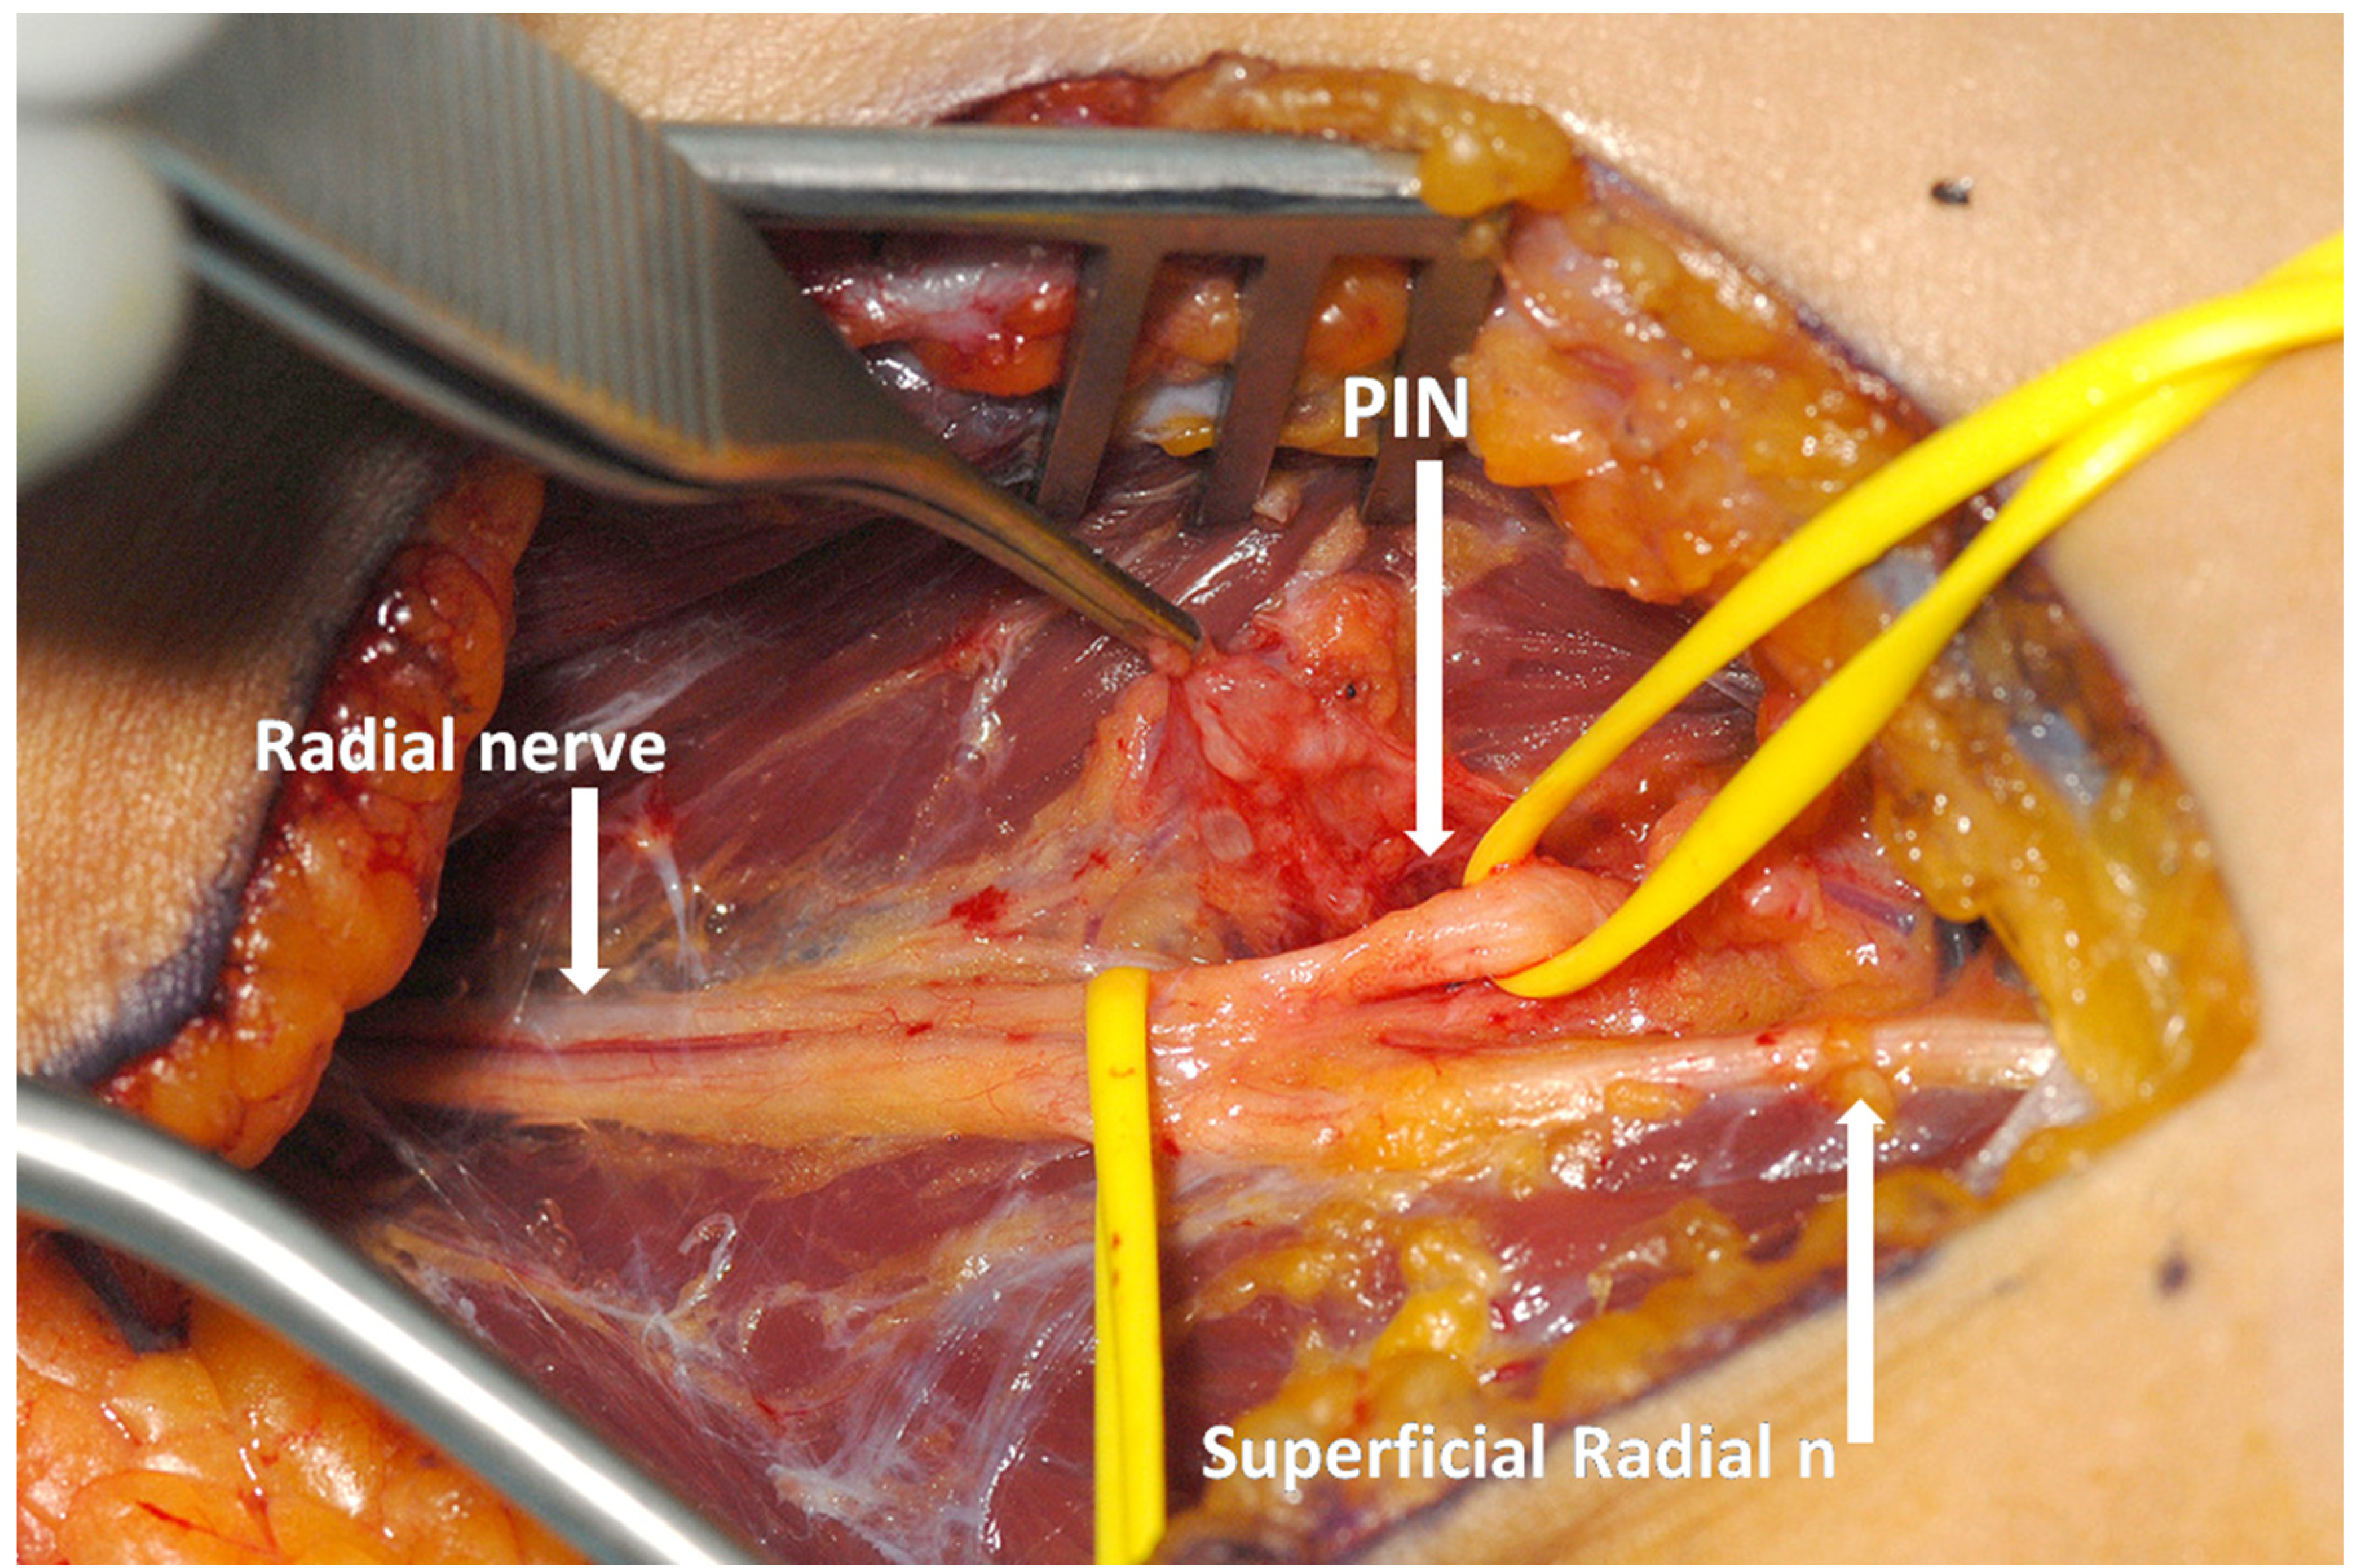 Figure 3a: Exploration of the posterior interosseous nerve (PIN) in a patient PIN syndrome. Operative photograph showing exposure of the branches of the radial nerve through a volar approach. 